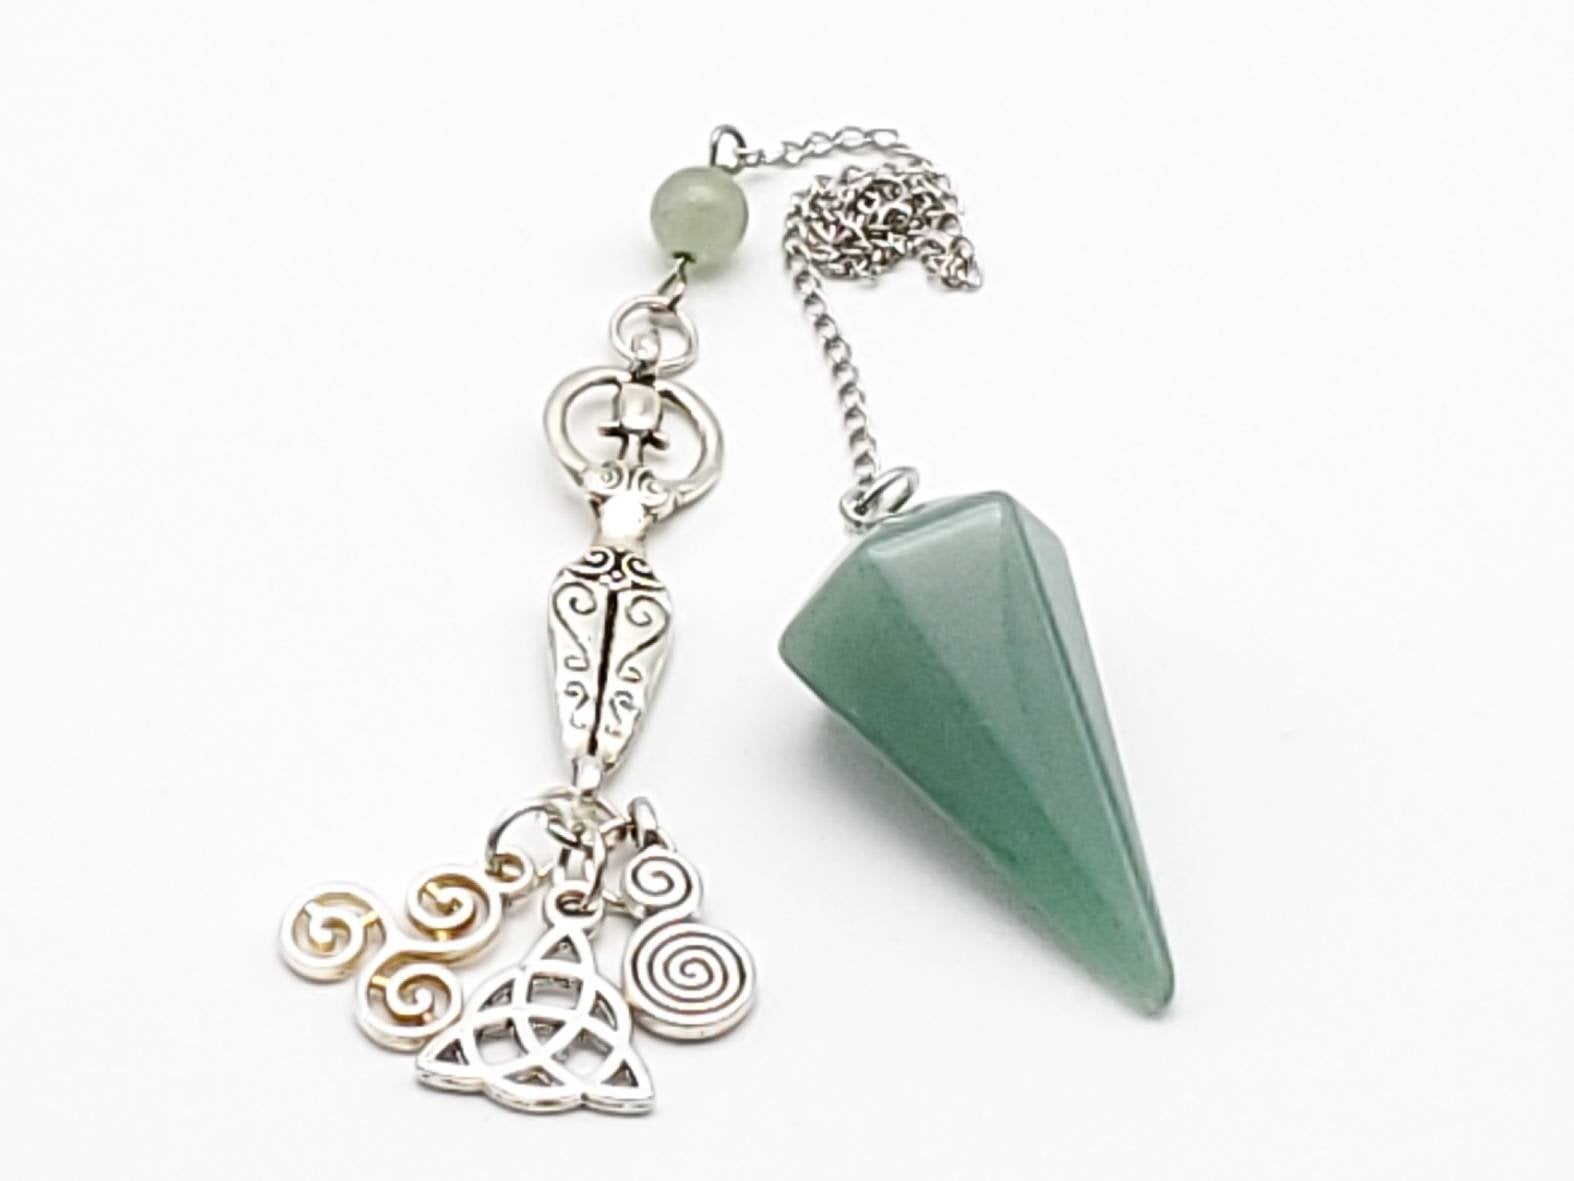 Aventurine Pendulum with Goddess, Triskelion, Triquera and Spiral Charms - The Caffeinated Raven